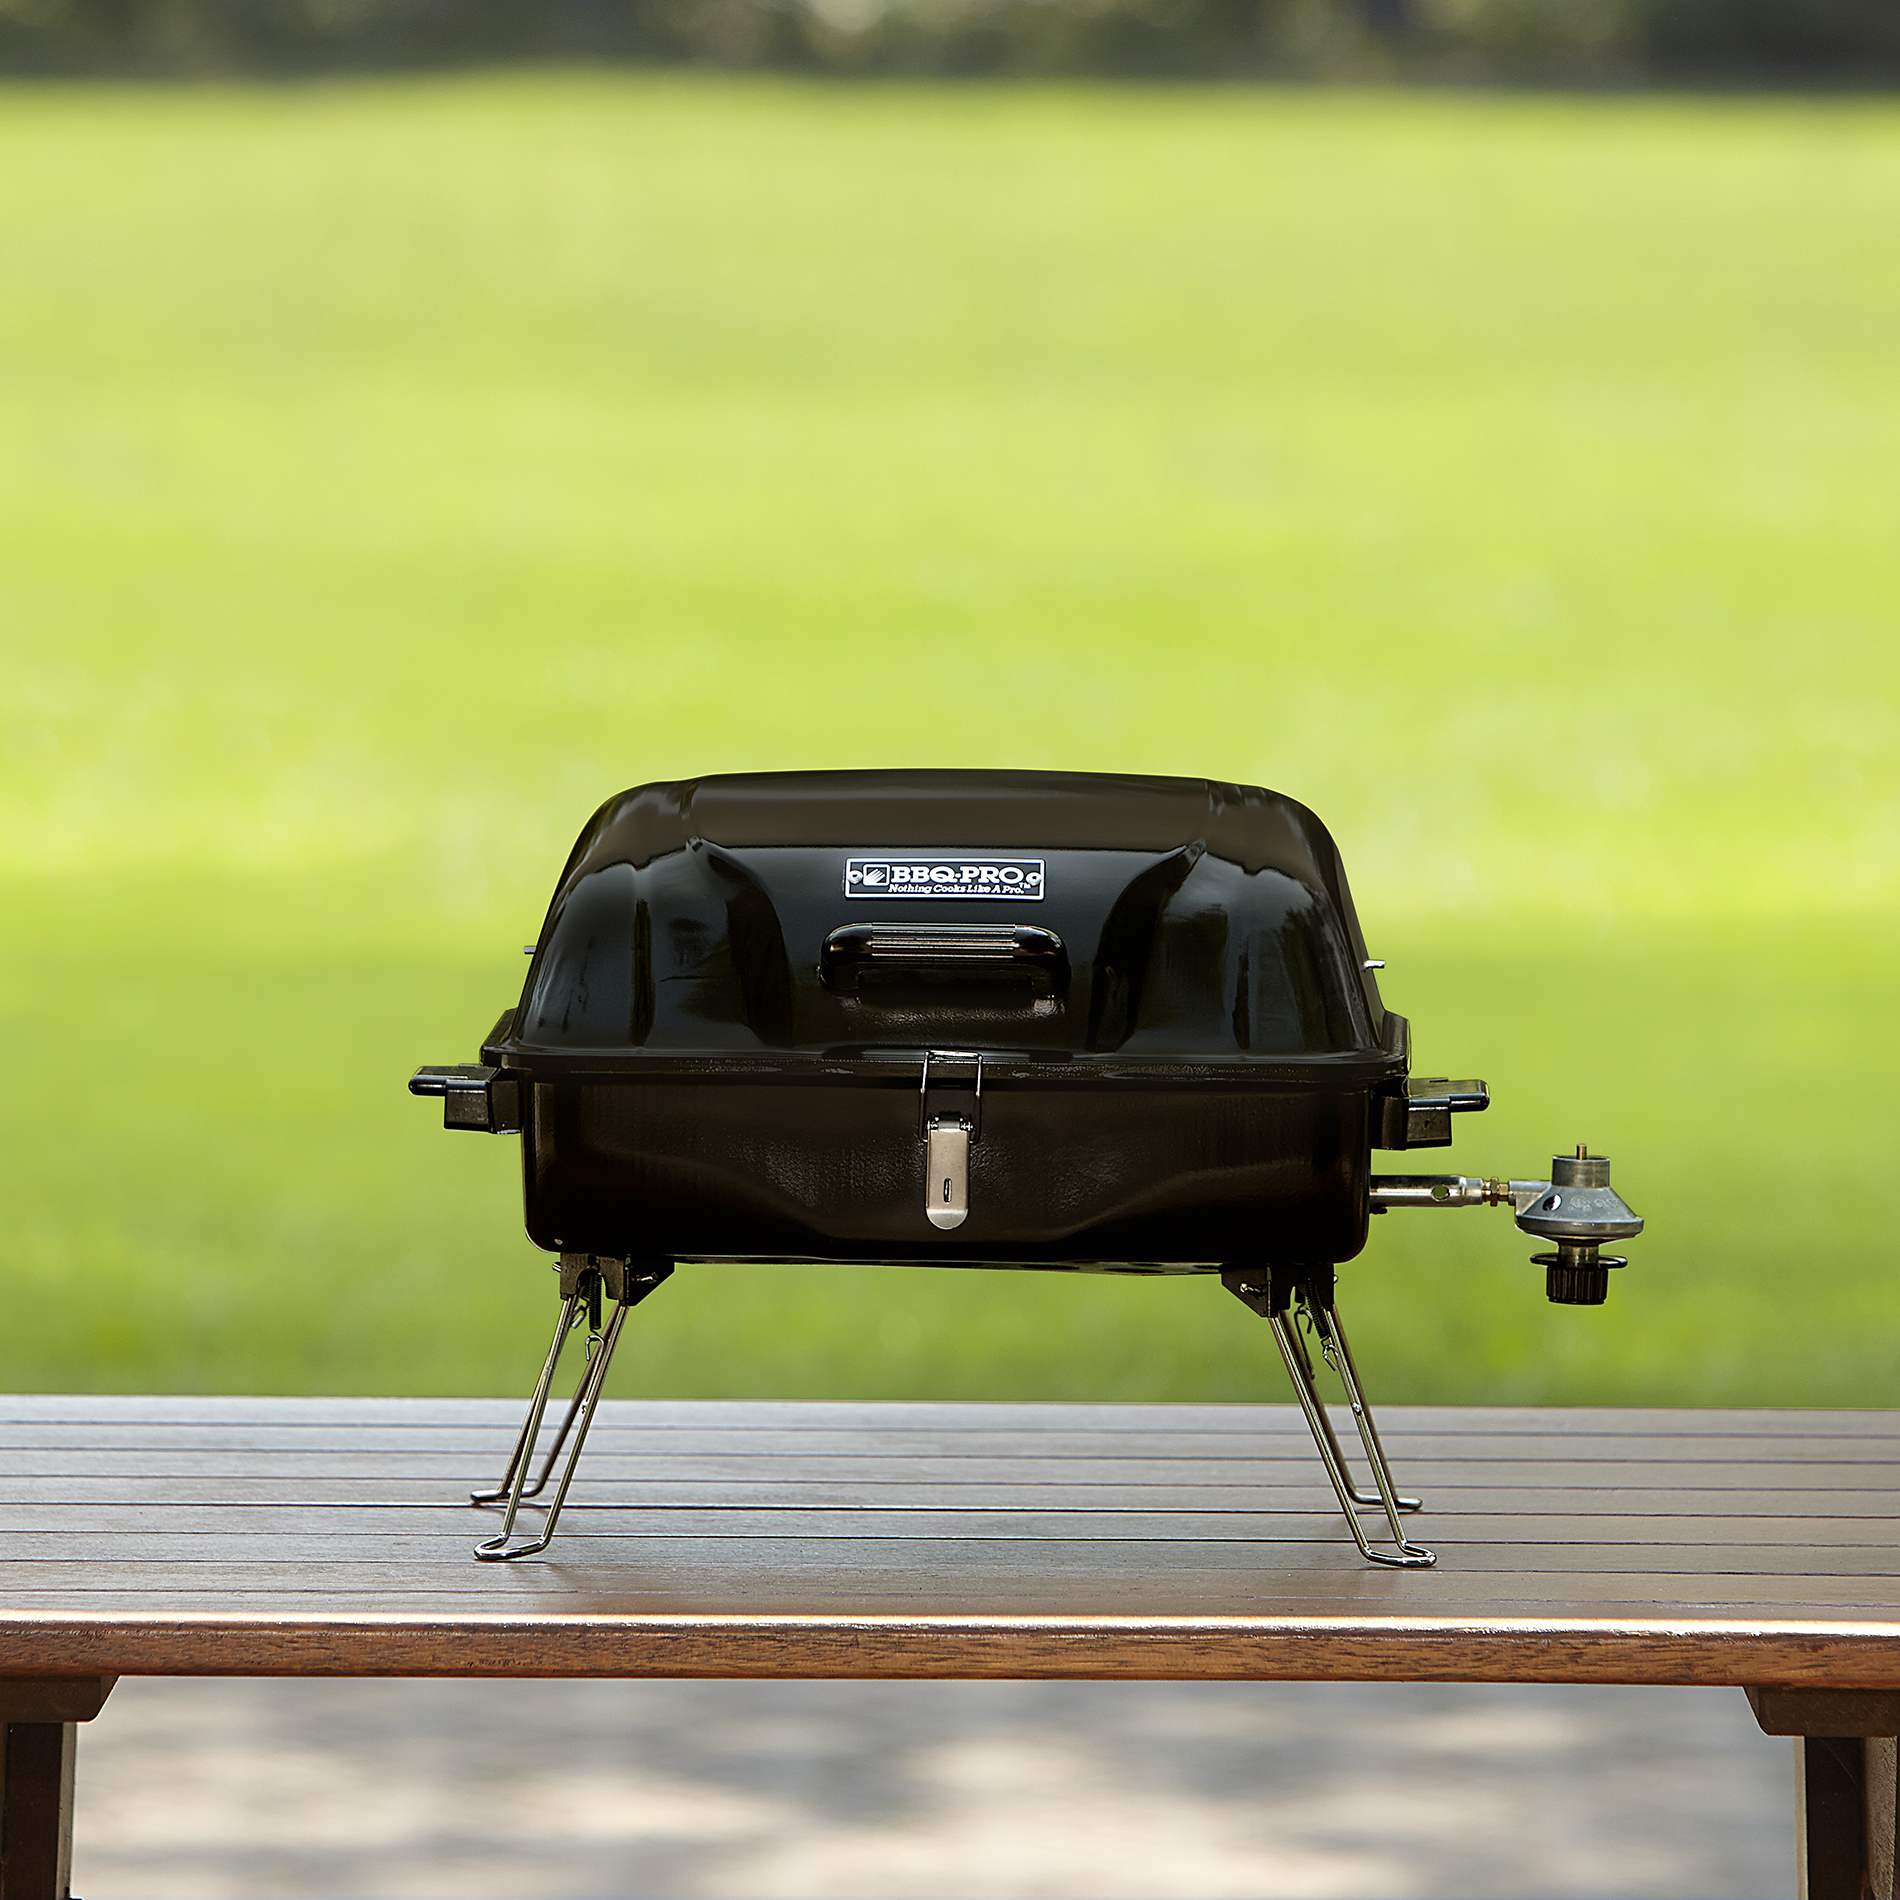 Bbq Pro Bqgl 653gwl 18 Square Tabletop Gas Grill Limited Availability American Freight Sears Outlet,Southern Chow Chow Relish